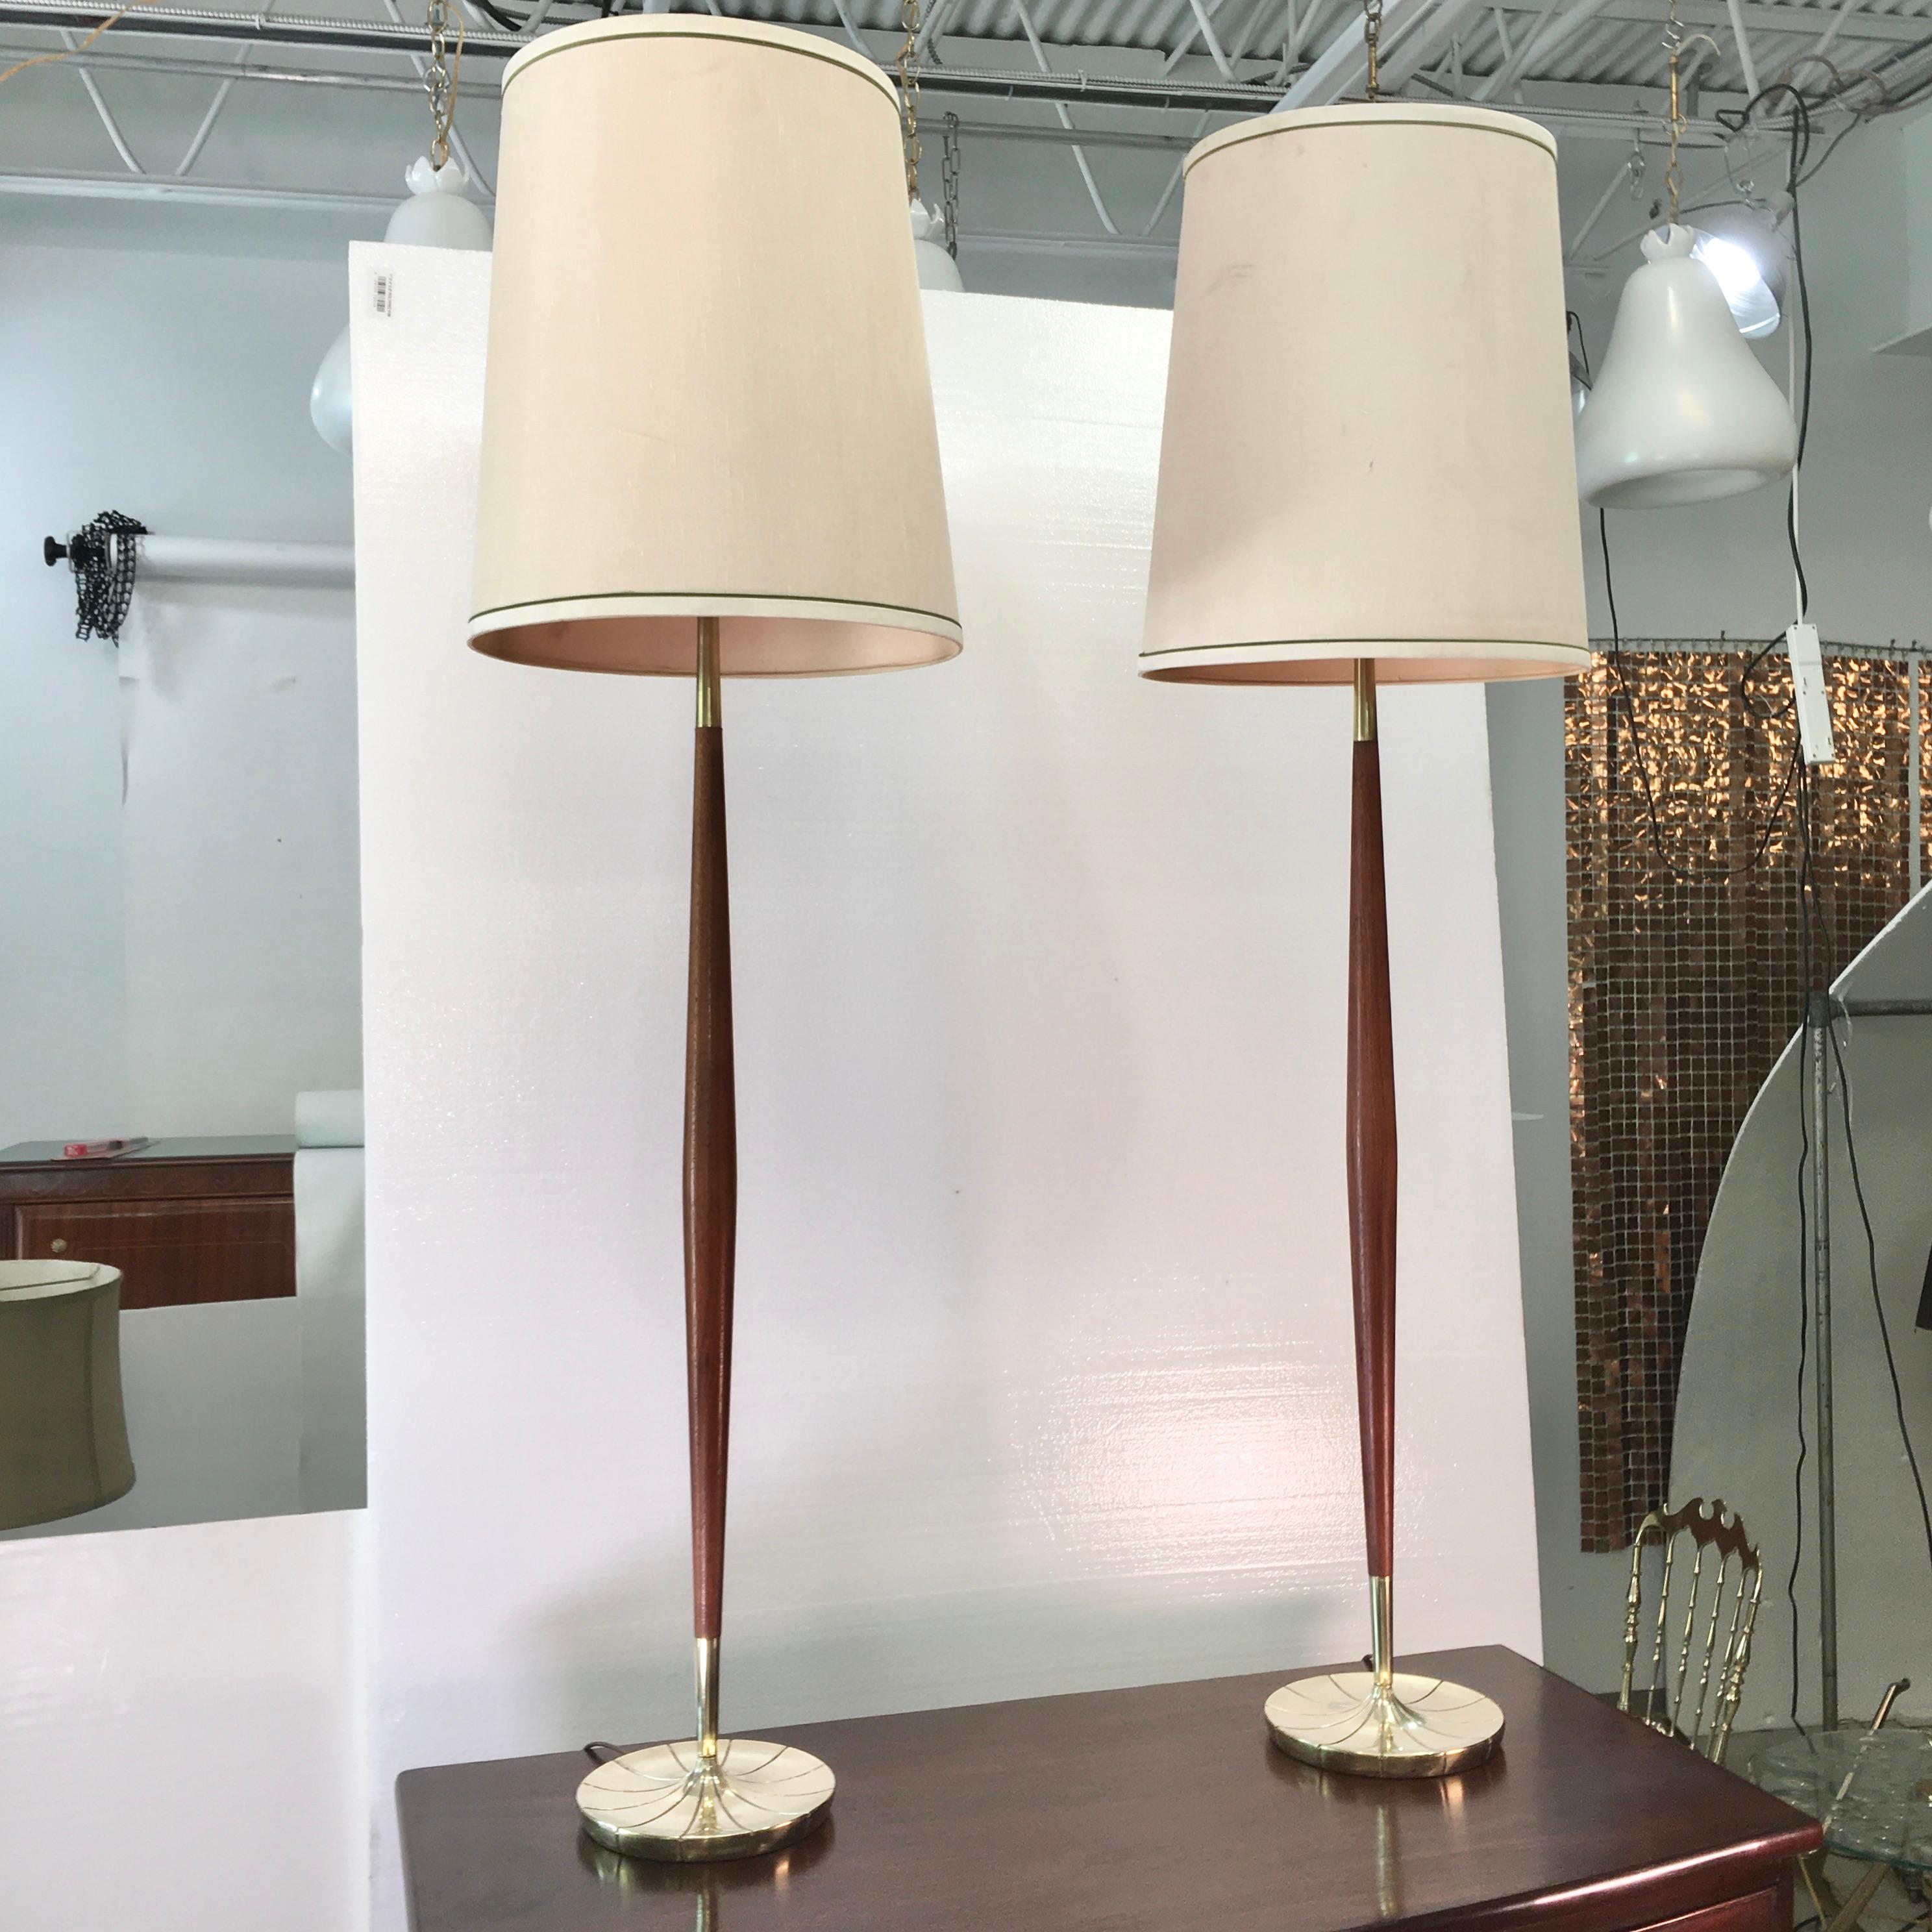 extra tall floor lamps